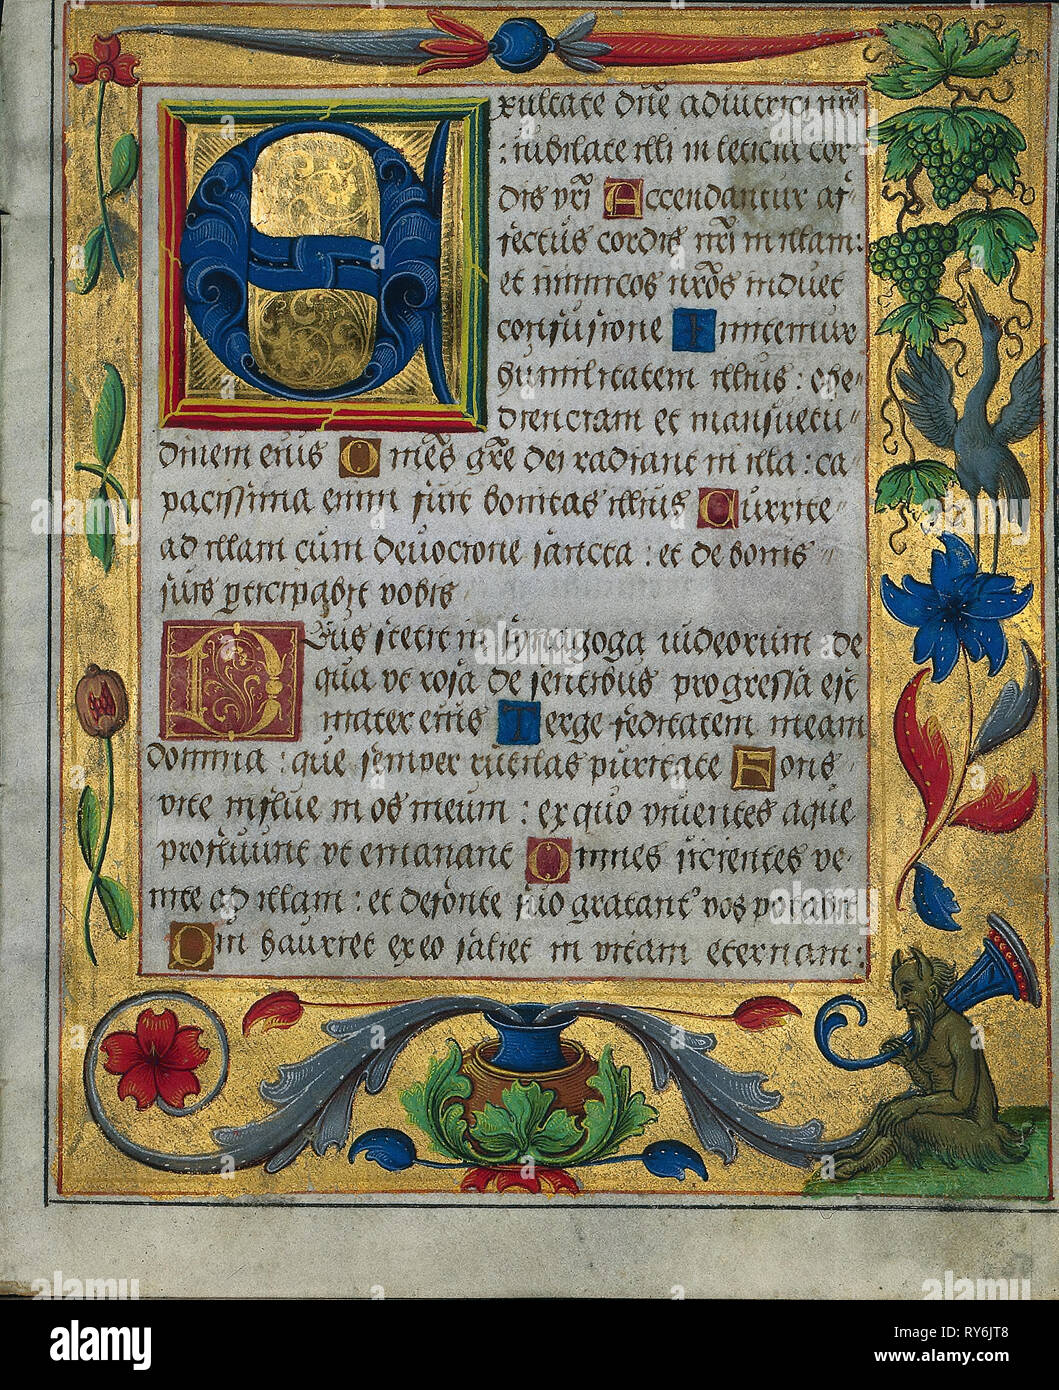 Leaf from a Psalter and Prayerbook: Ornamental Border with Pea Vines and a Girl Kneading Bread (recto) and Ornamental Boarder with Carnations, a Thistle, and a Cook Ladling Soup (verso) (1 of 3 Excised Leaves), c. 1524. Germany, Hildesheim(?), 16th century. Ink, tempera and liquid gold on vellum; each leaf: 16.6 x 13.5 cm (6 9/16 x 5 5/16 in Stock Photo